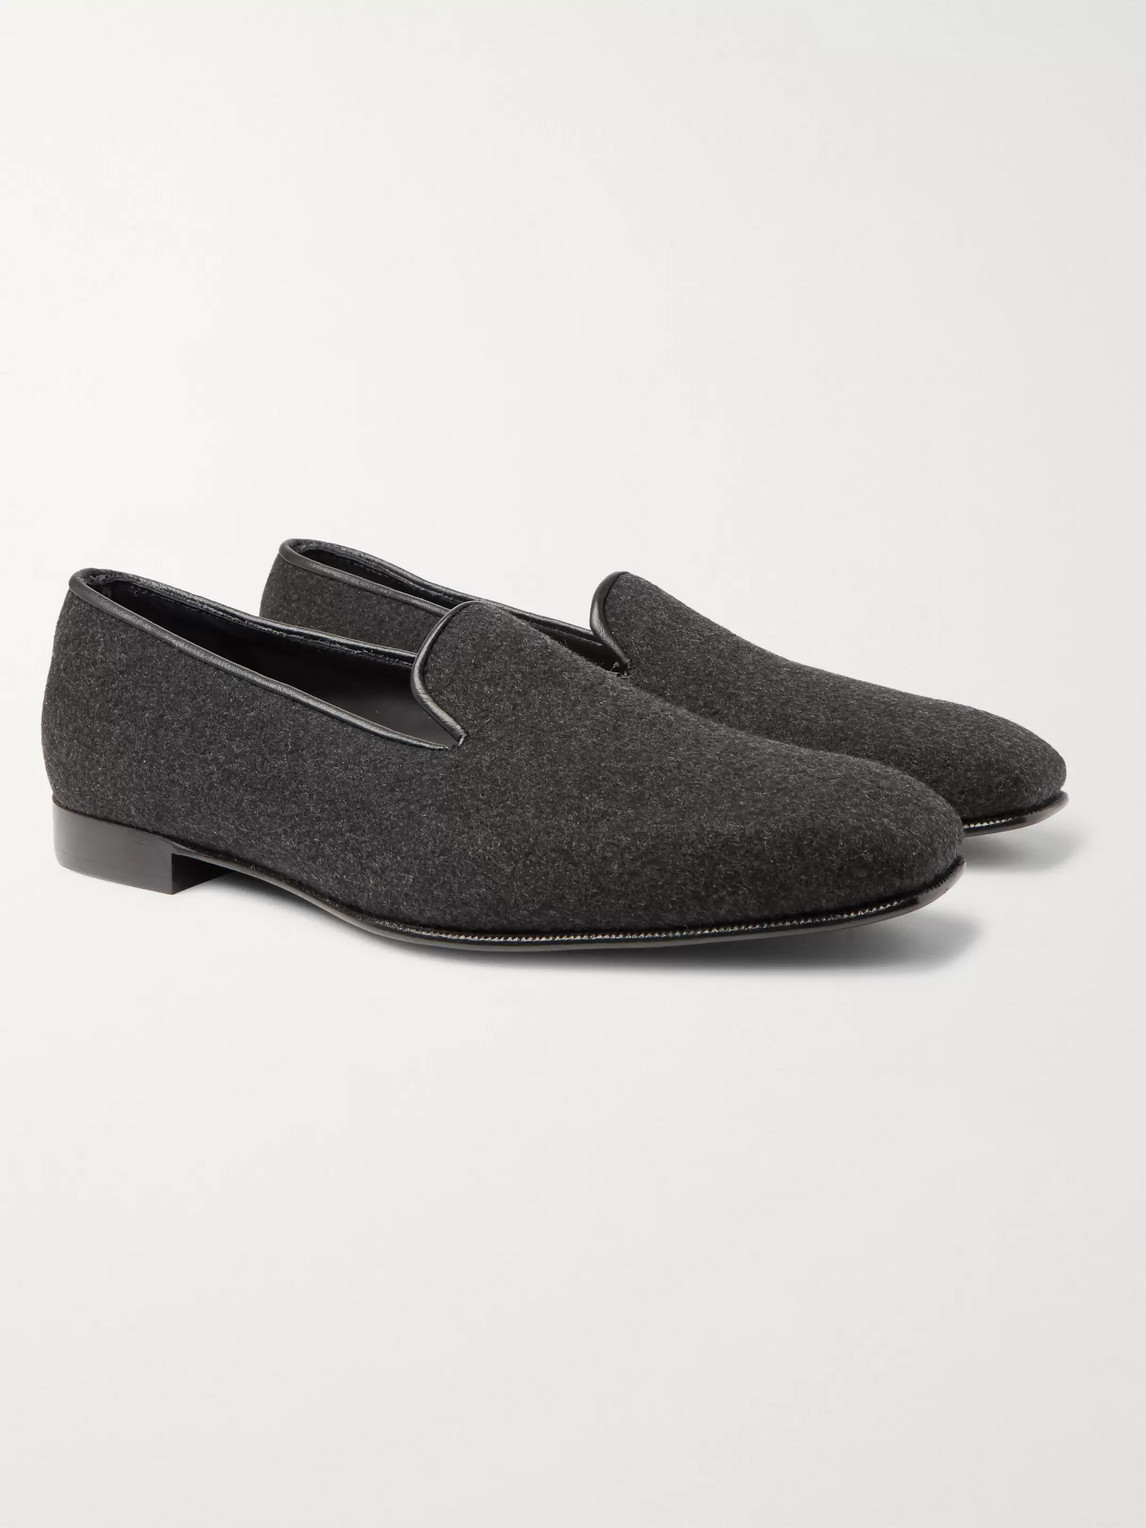 Anderson & Sheppard George Cleverley Leather-trimmed Cashmere Slippers In Grey